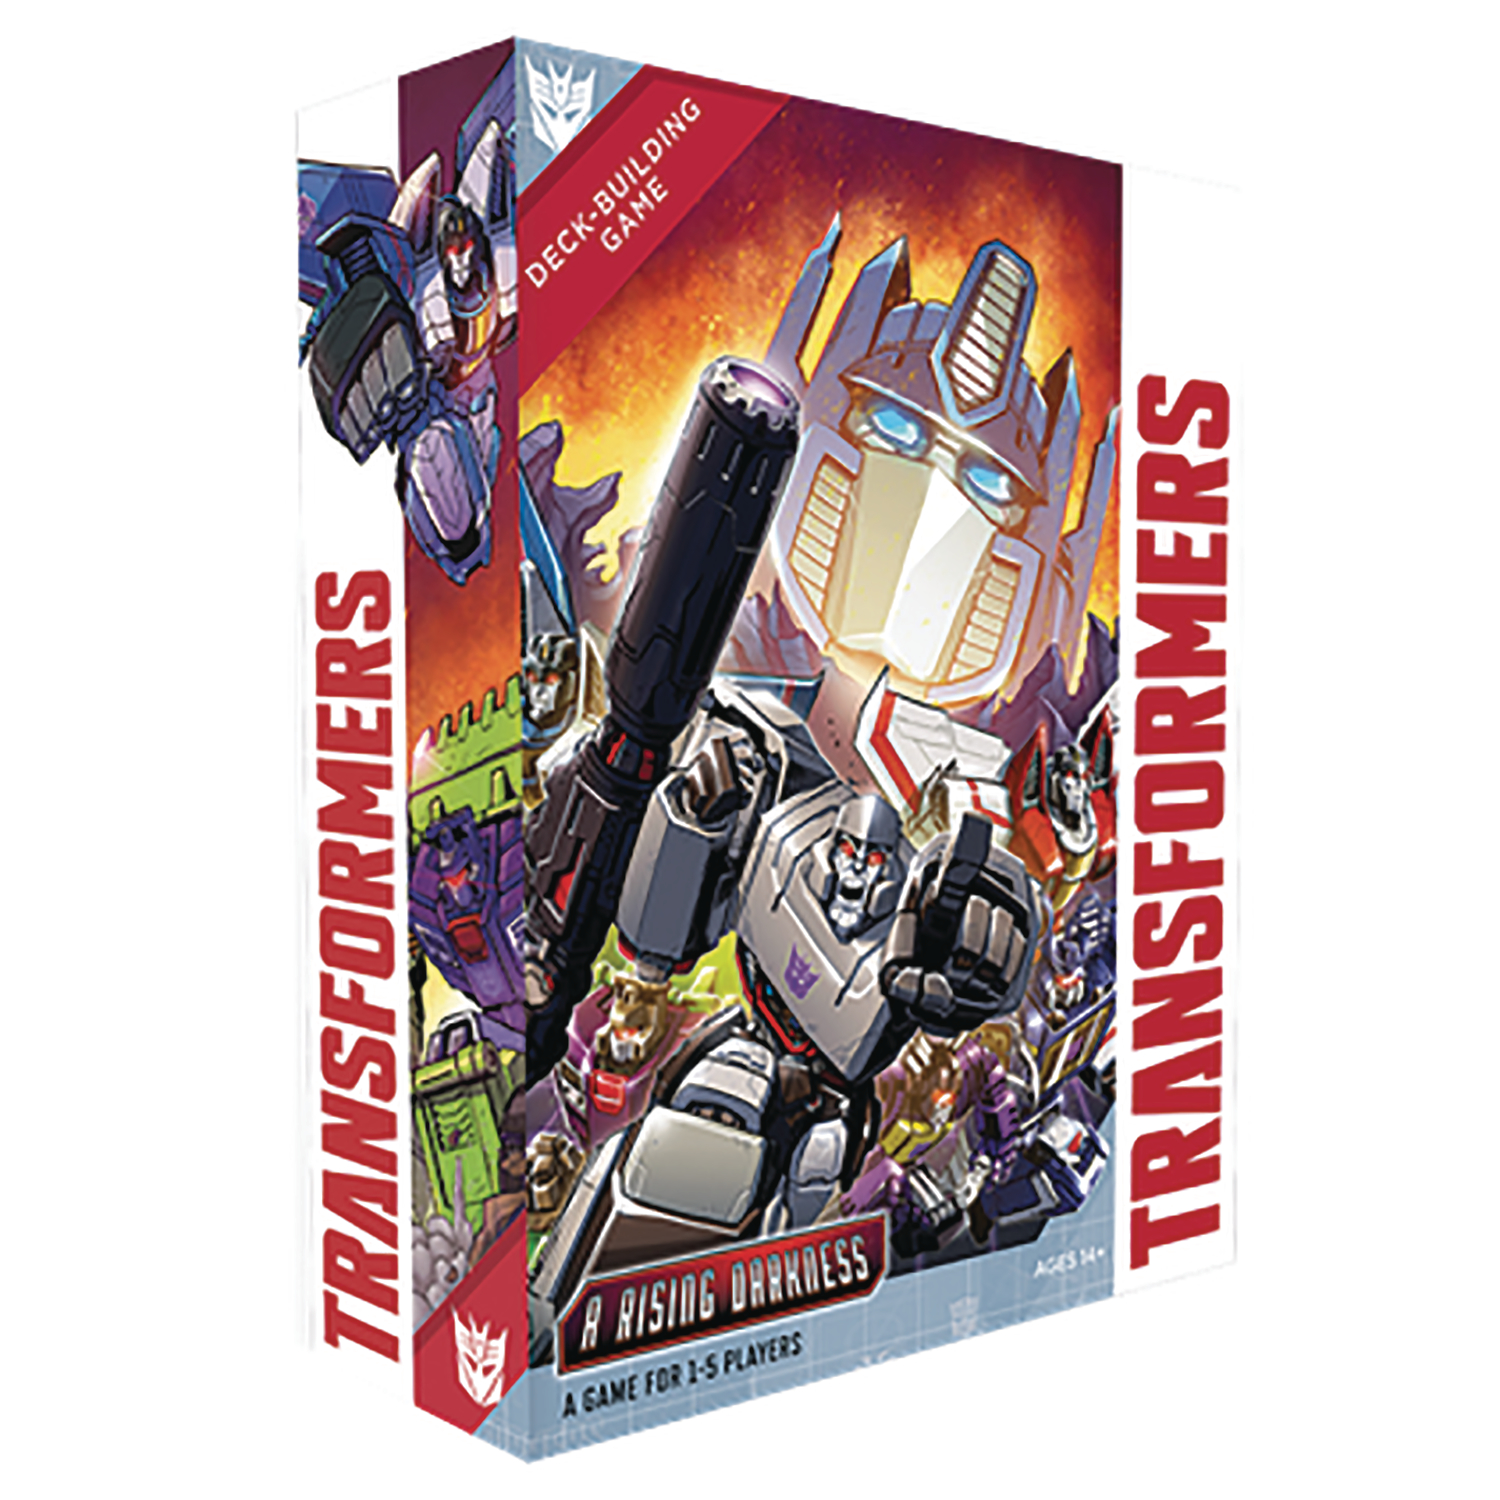 Transformers Dbg Rising Darkness Expansion